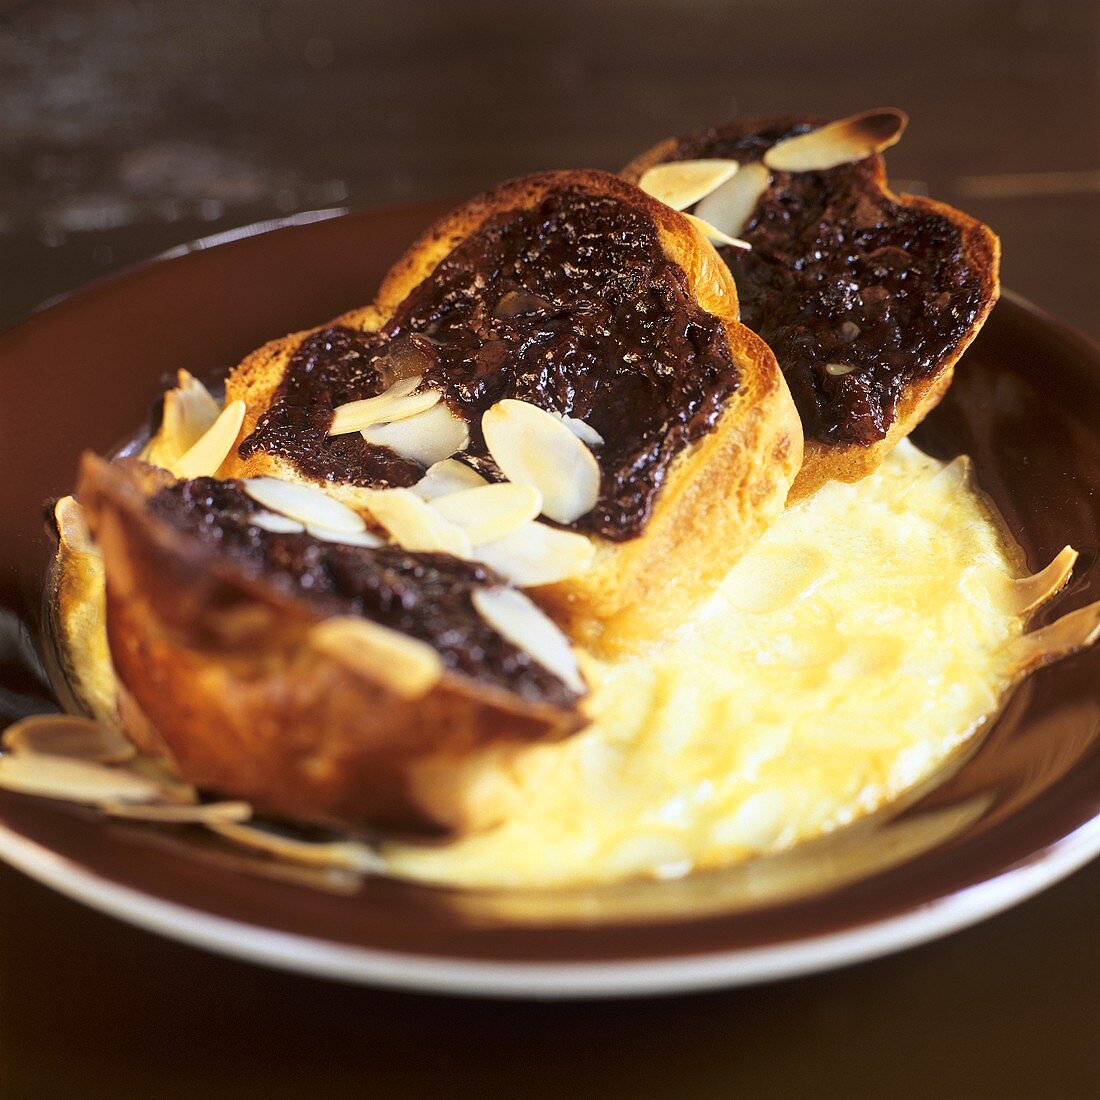 Baked brioches with chocolate sauce and almonds